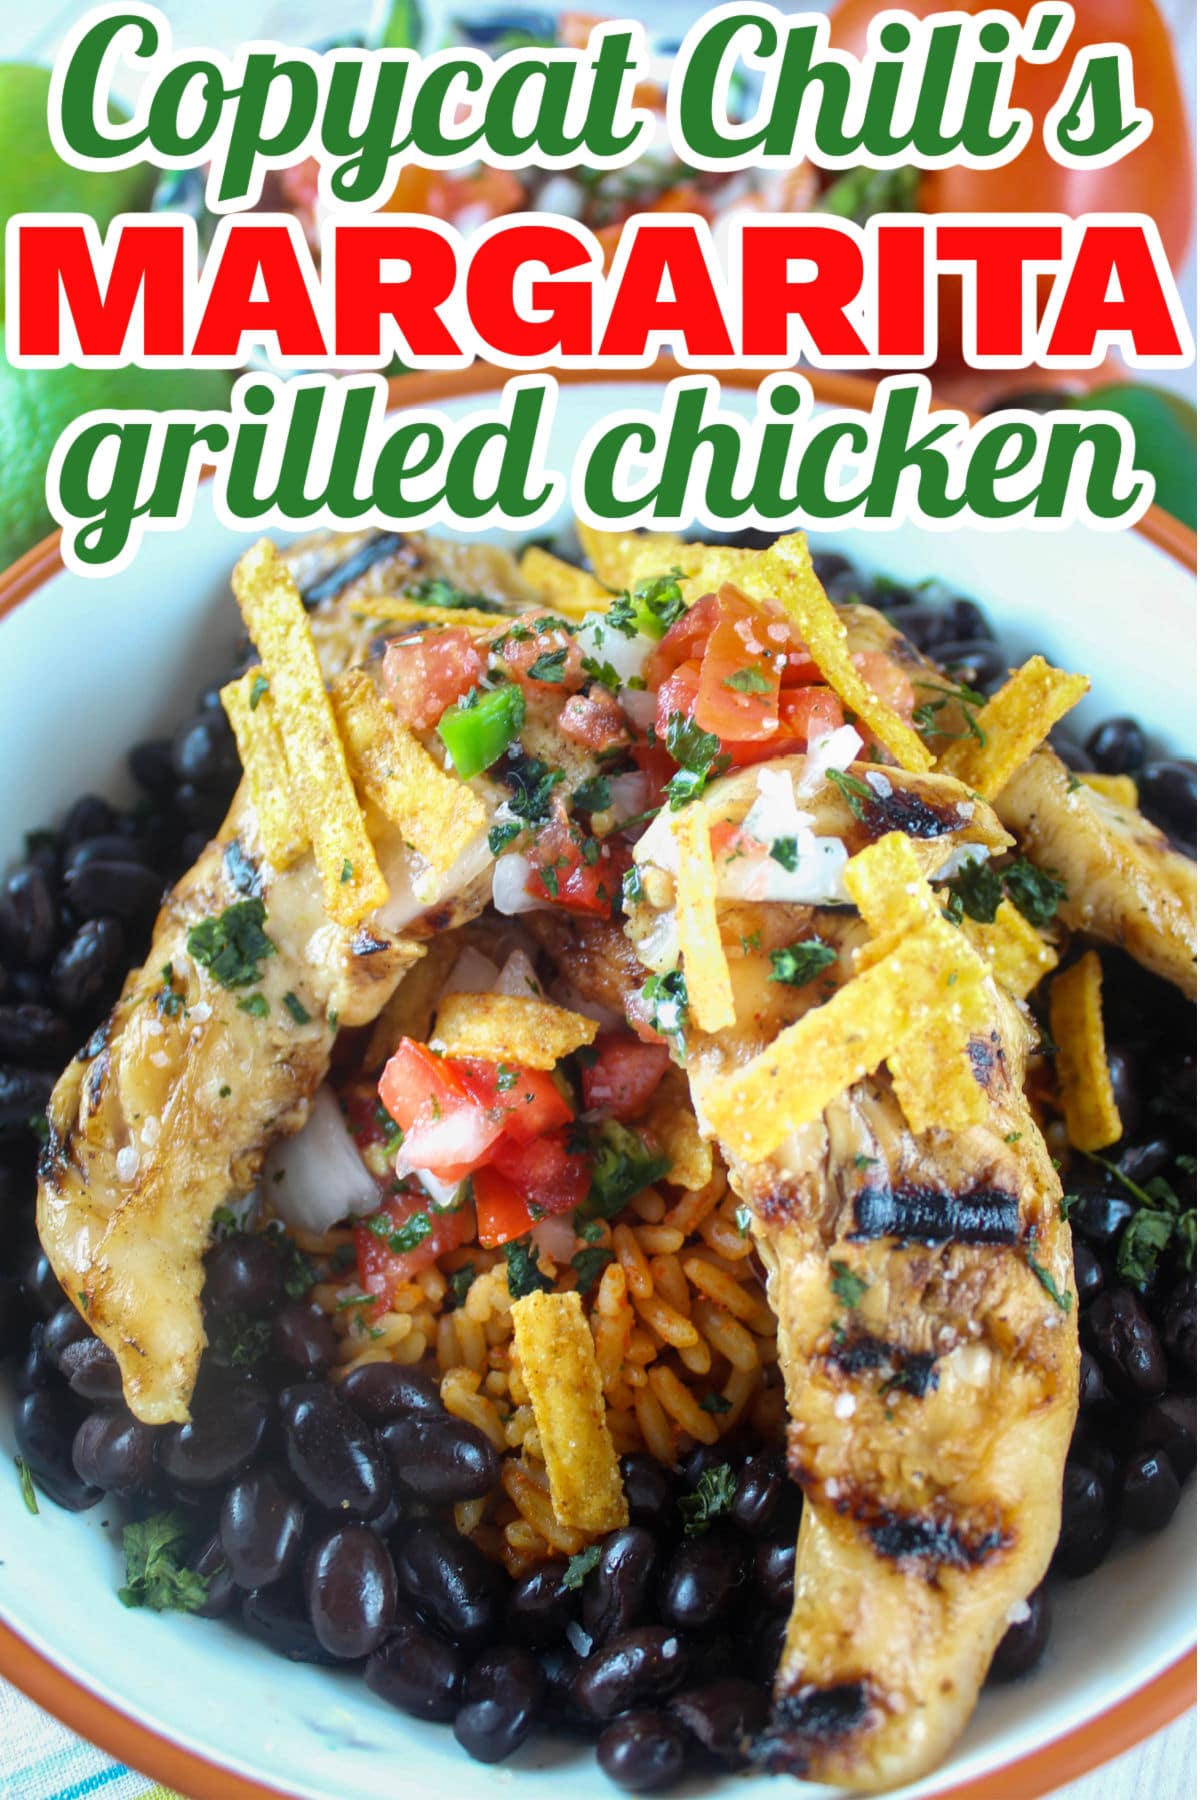 Chili's Margarita Grilled Chicken is one of my favorite dishes - lime-infused grilled chicken served on top of Spanish rice and black beans - topped with fresh made pico de gallo! It's such a refreshing summer dish - I loved it. And - the pico took three minutes to make!  via @foodhussy